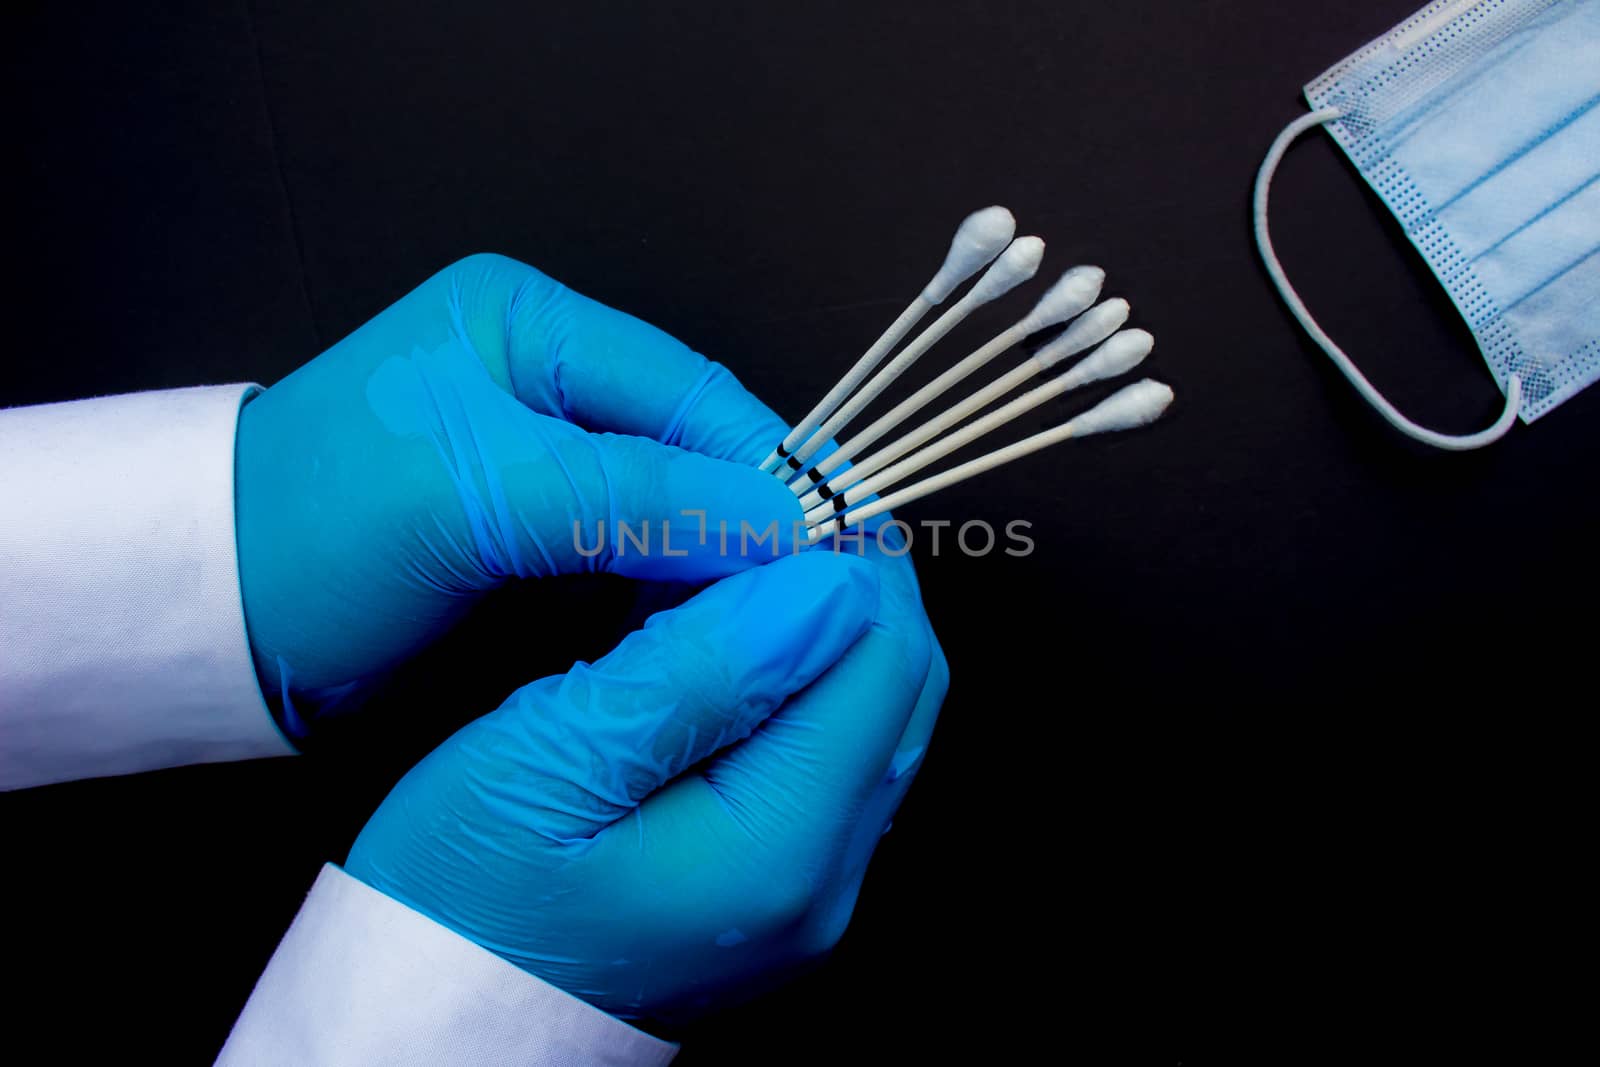 A medical personal holding throat swabs next to a medical face mask on a black background.